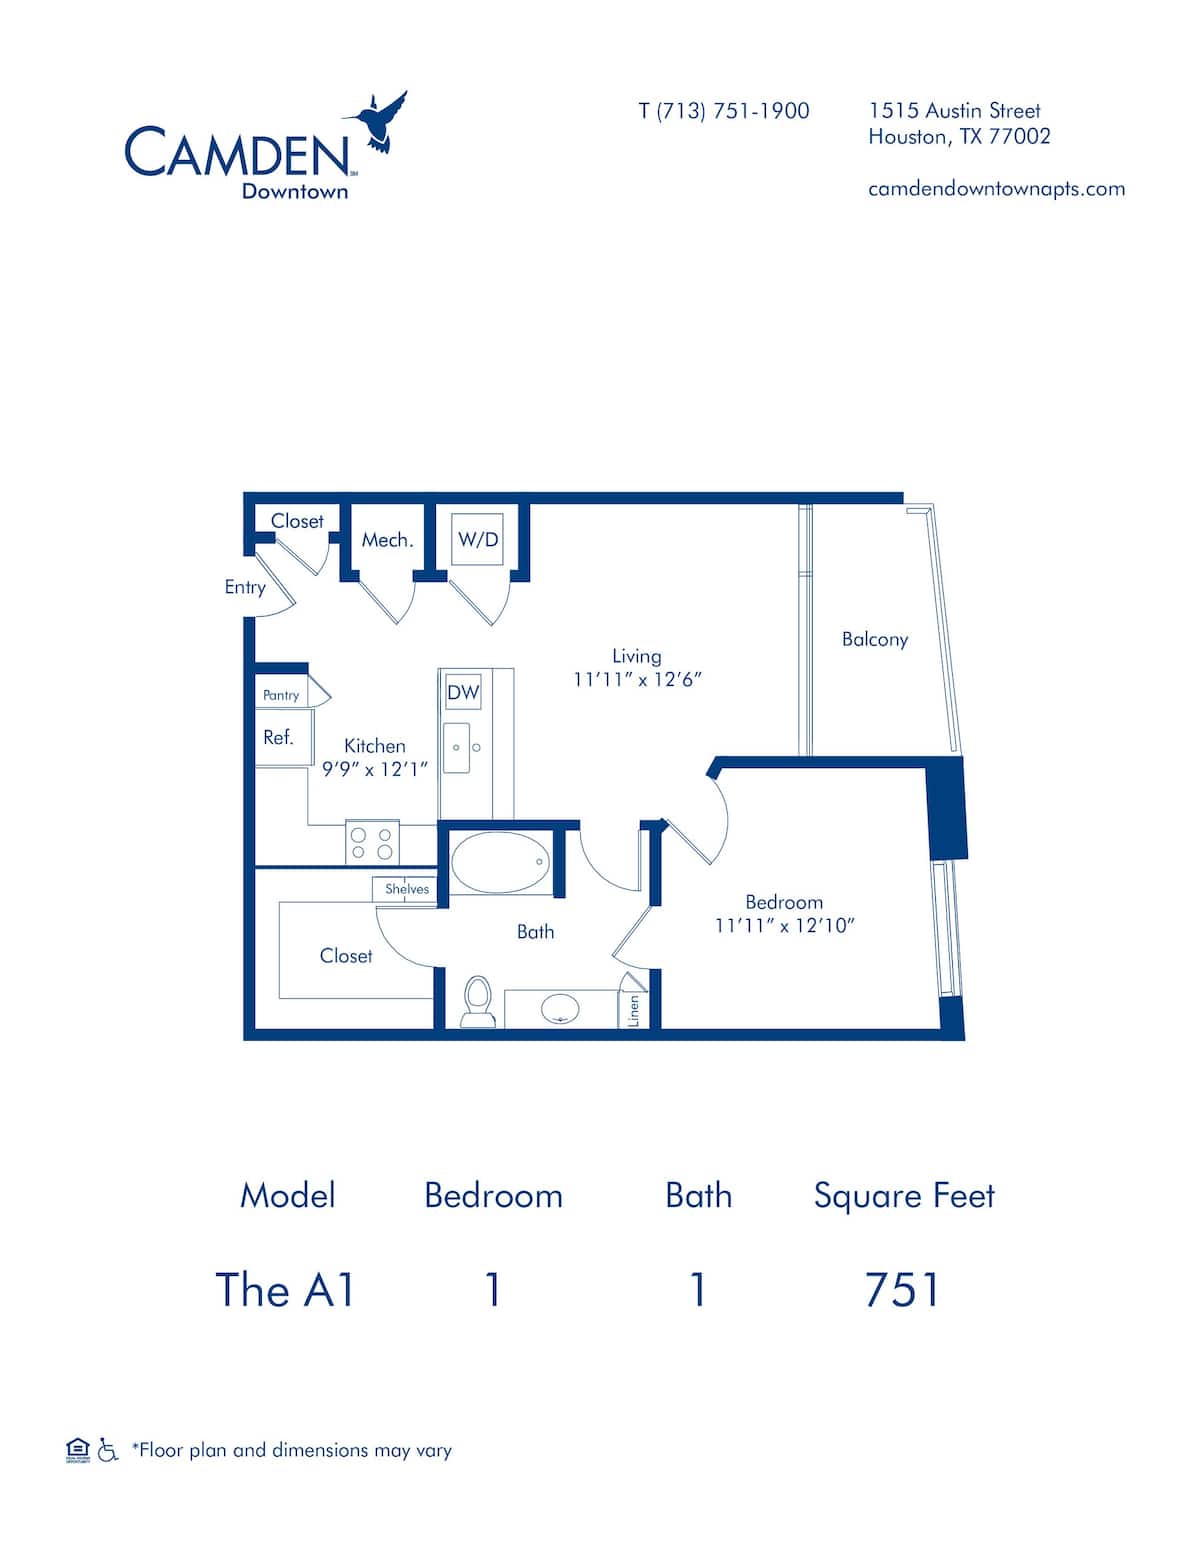 Floorplan diagram for The A1, showing 1 bedroom